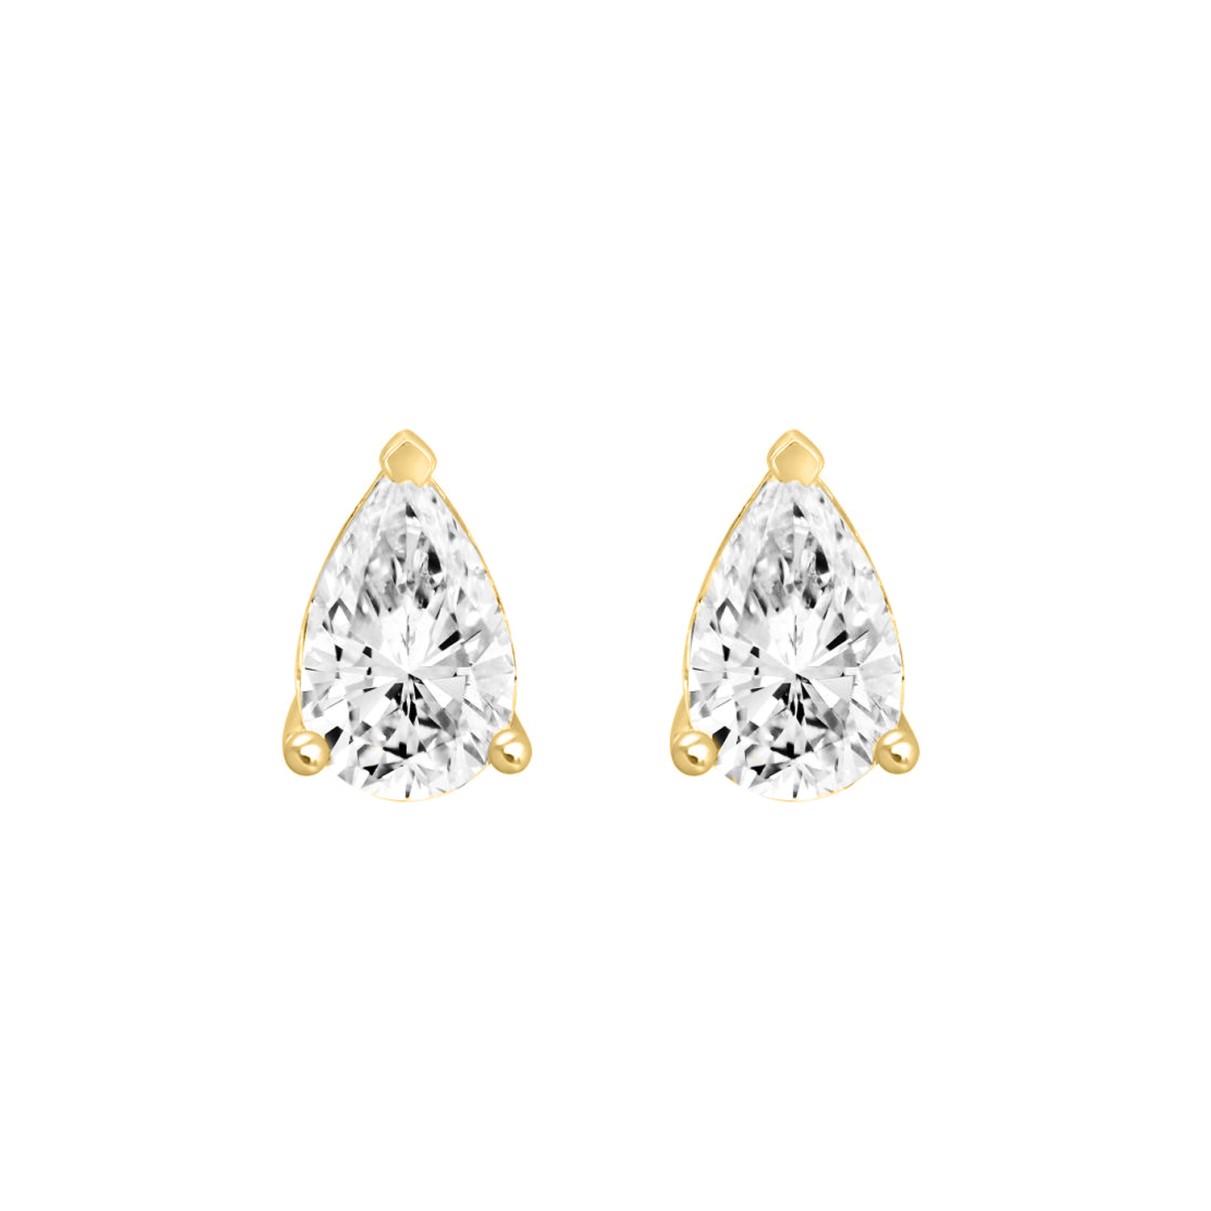 LADIES SOLITAIRE EARRINGS 2CT PEAR DIAMOND 14K YELLOW GOLD